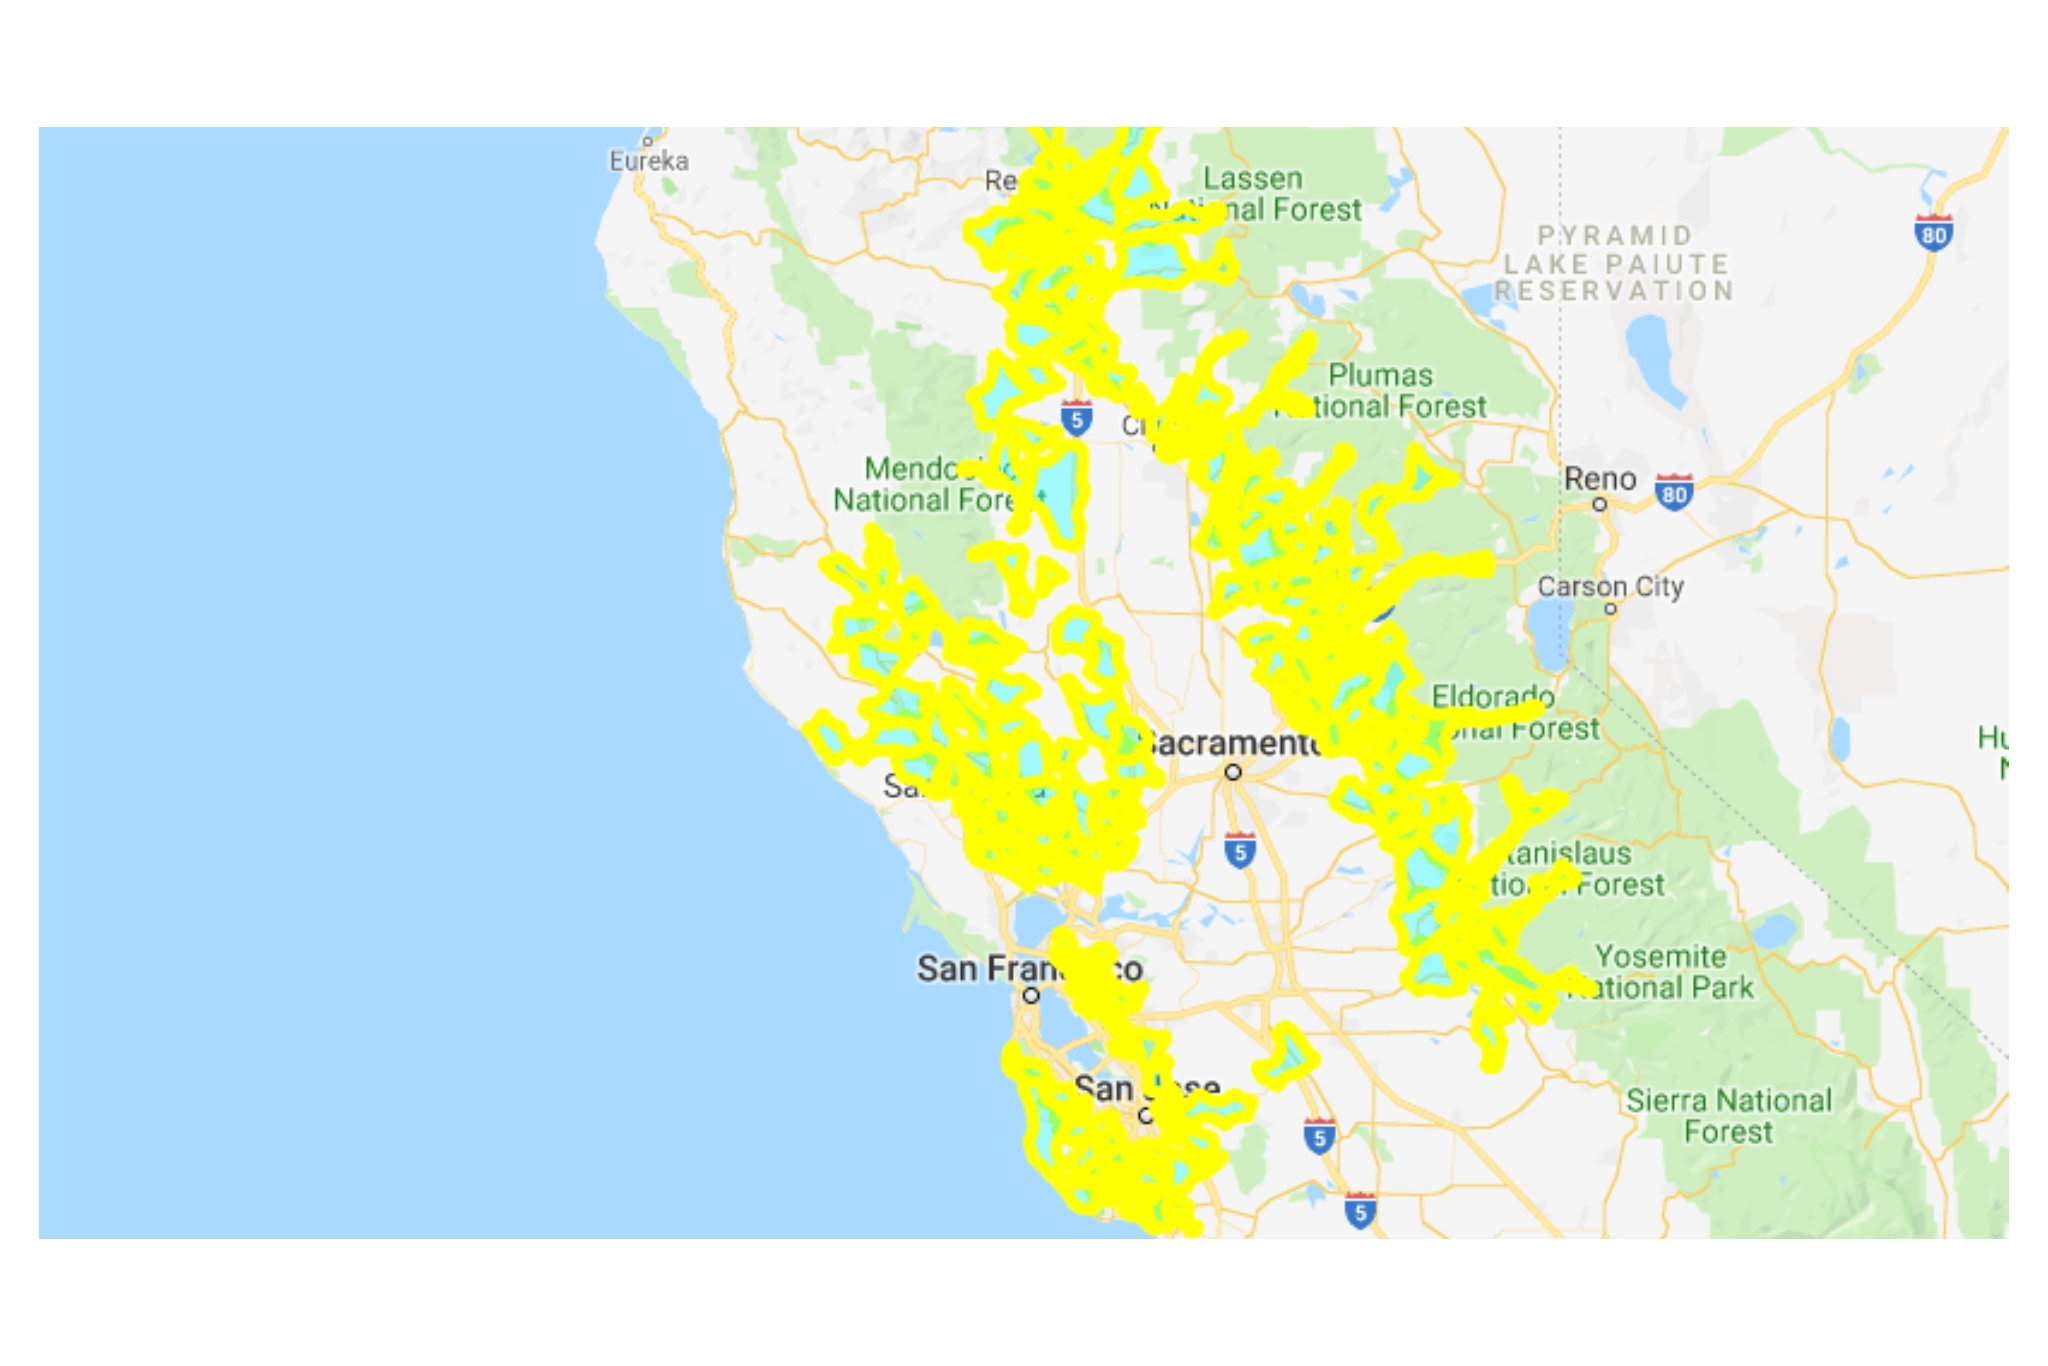 coast electric power outage map Map Shows Neighborhoods Impacted By Pg E Power Shutoffs Sfgate coast electric power outage map